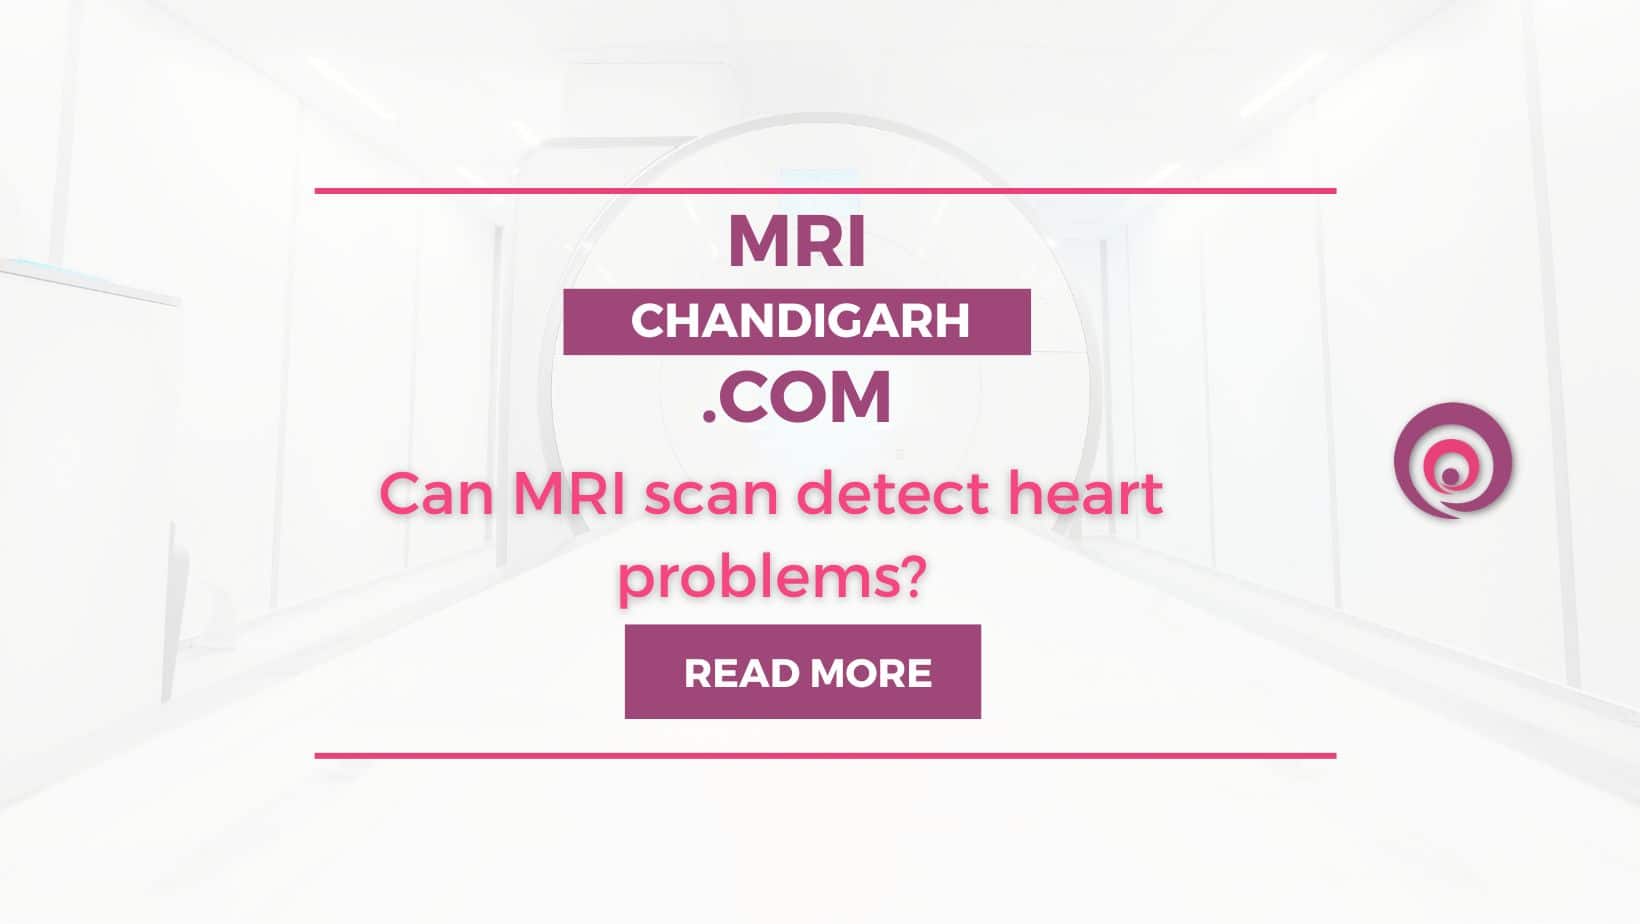 Can MRI scan detect heart problems?